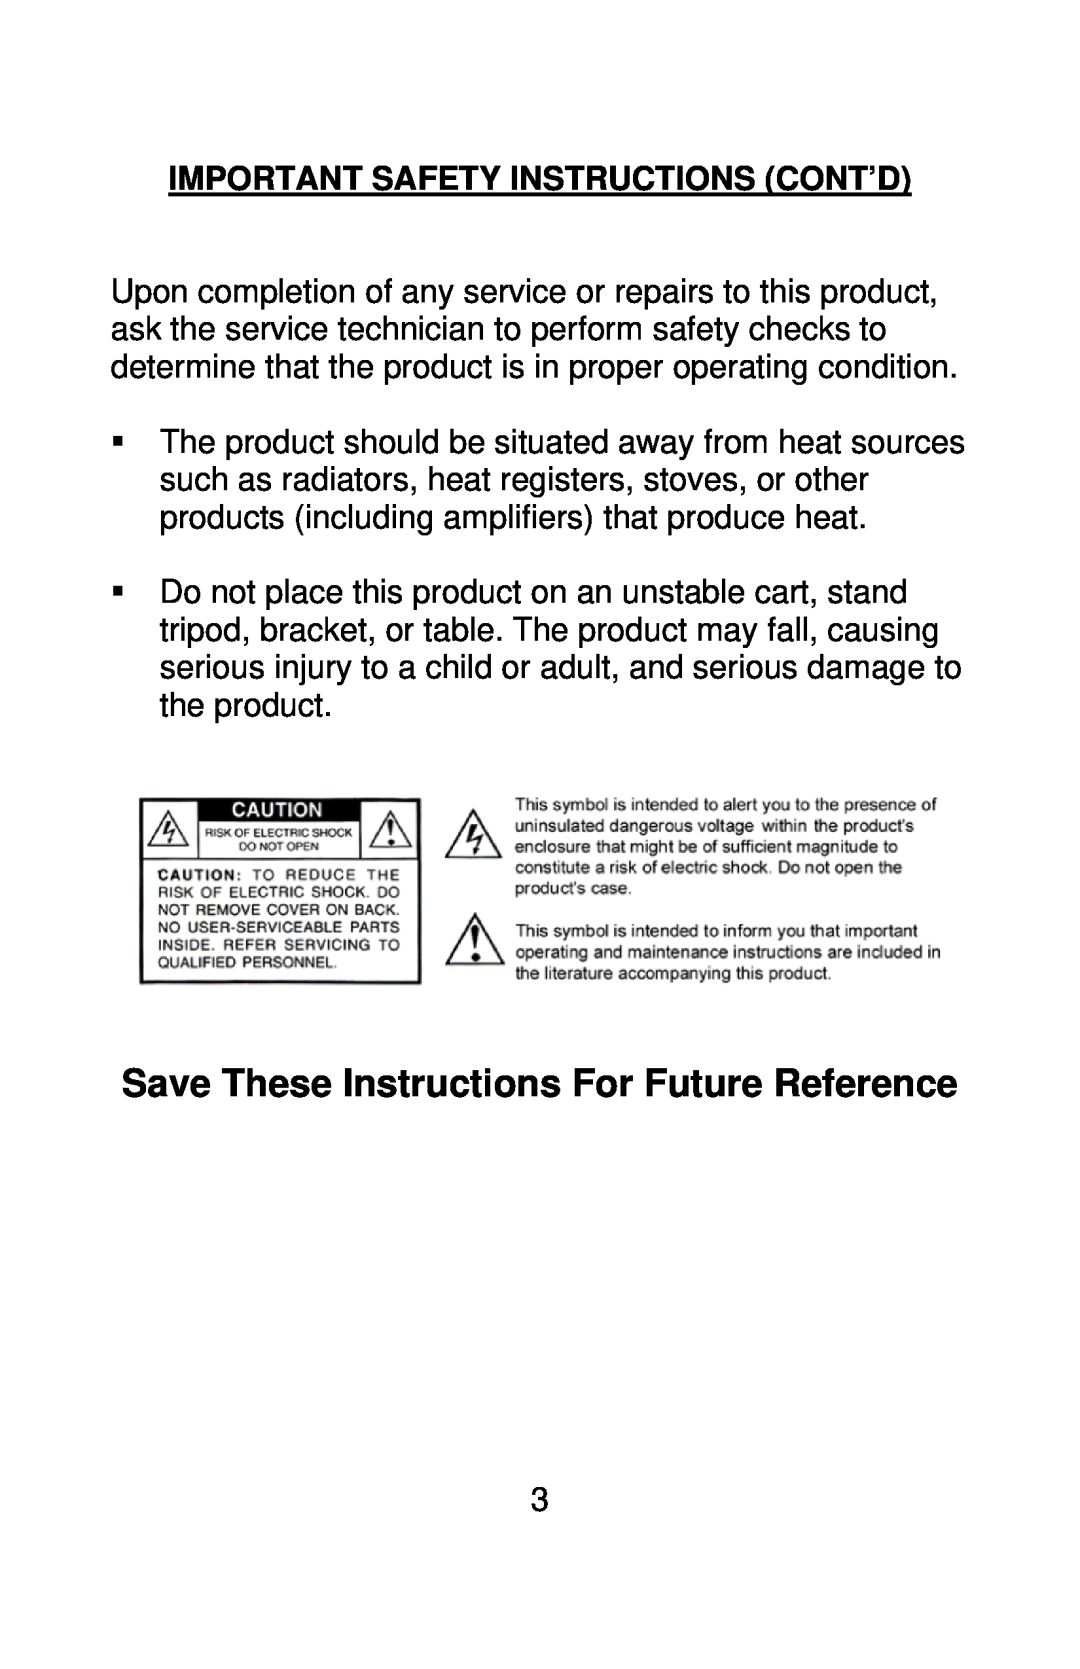 Nostalgia Electrics BCS-997, BCD-997 Save These Instructions For Future Reference, Important Safety Instructions Cont’D 